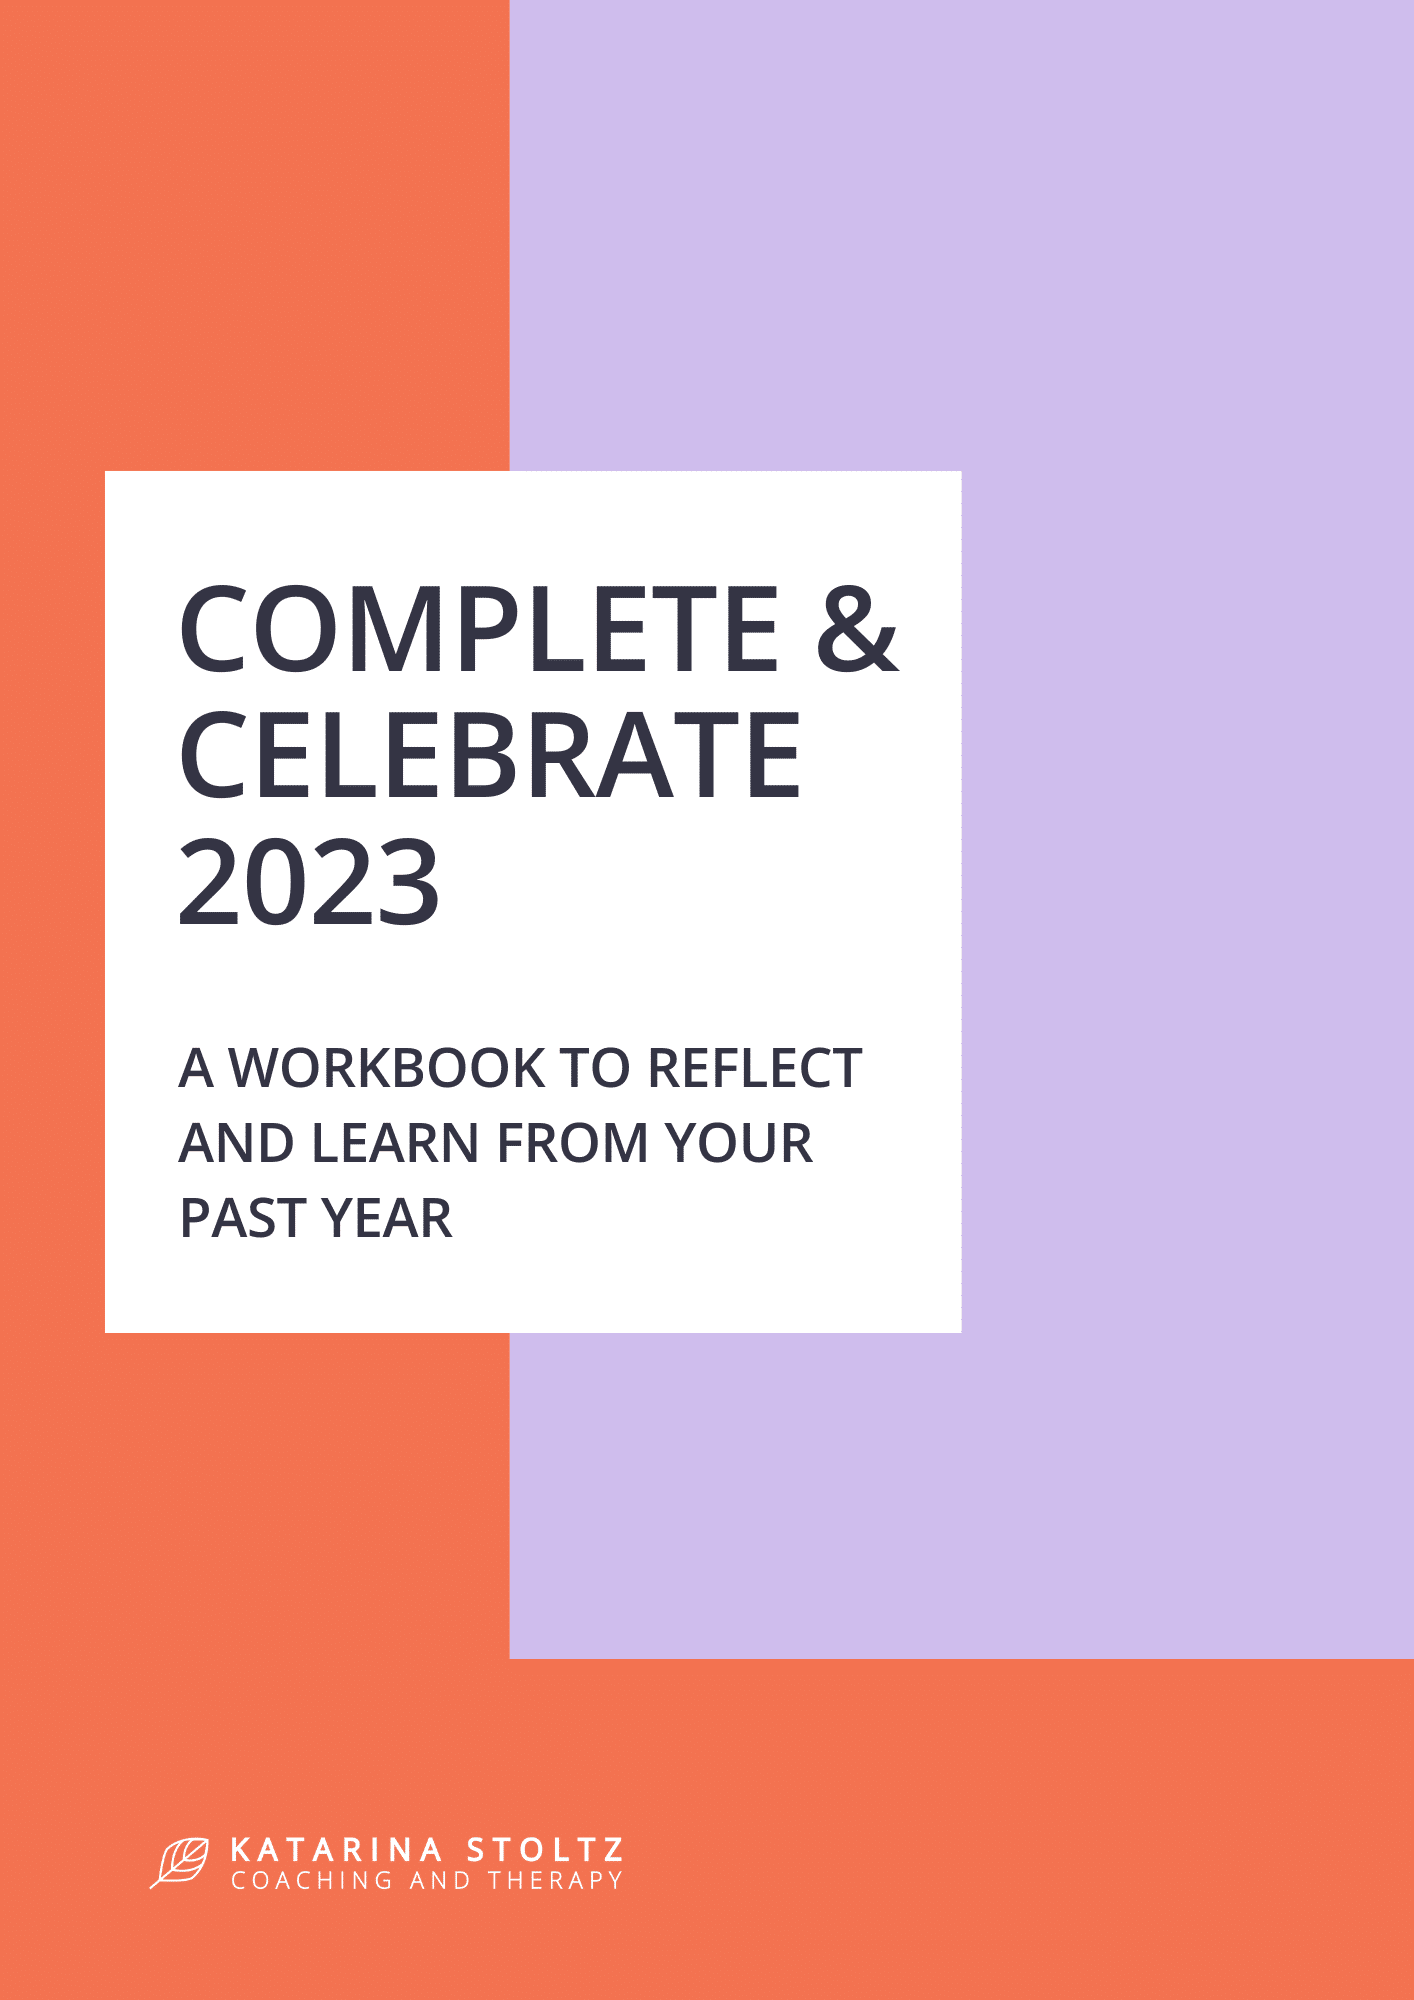 Complete and Celebrate 2023 Workbook cover